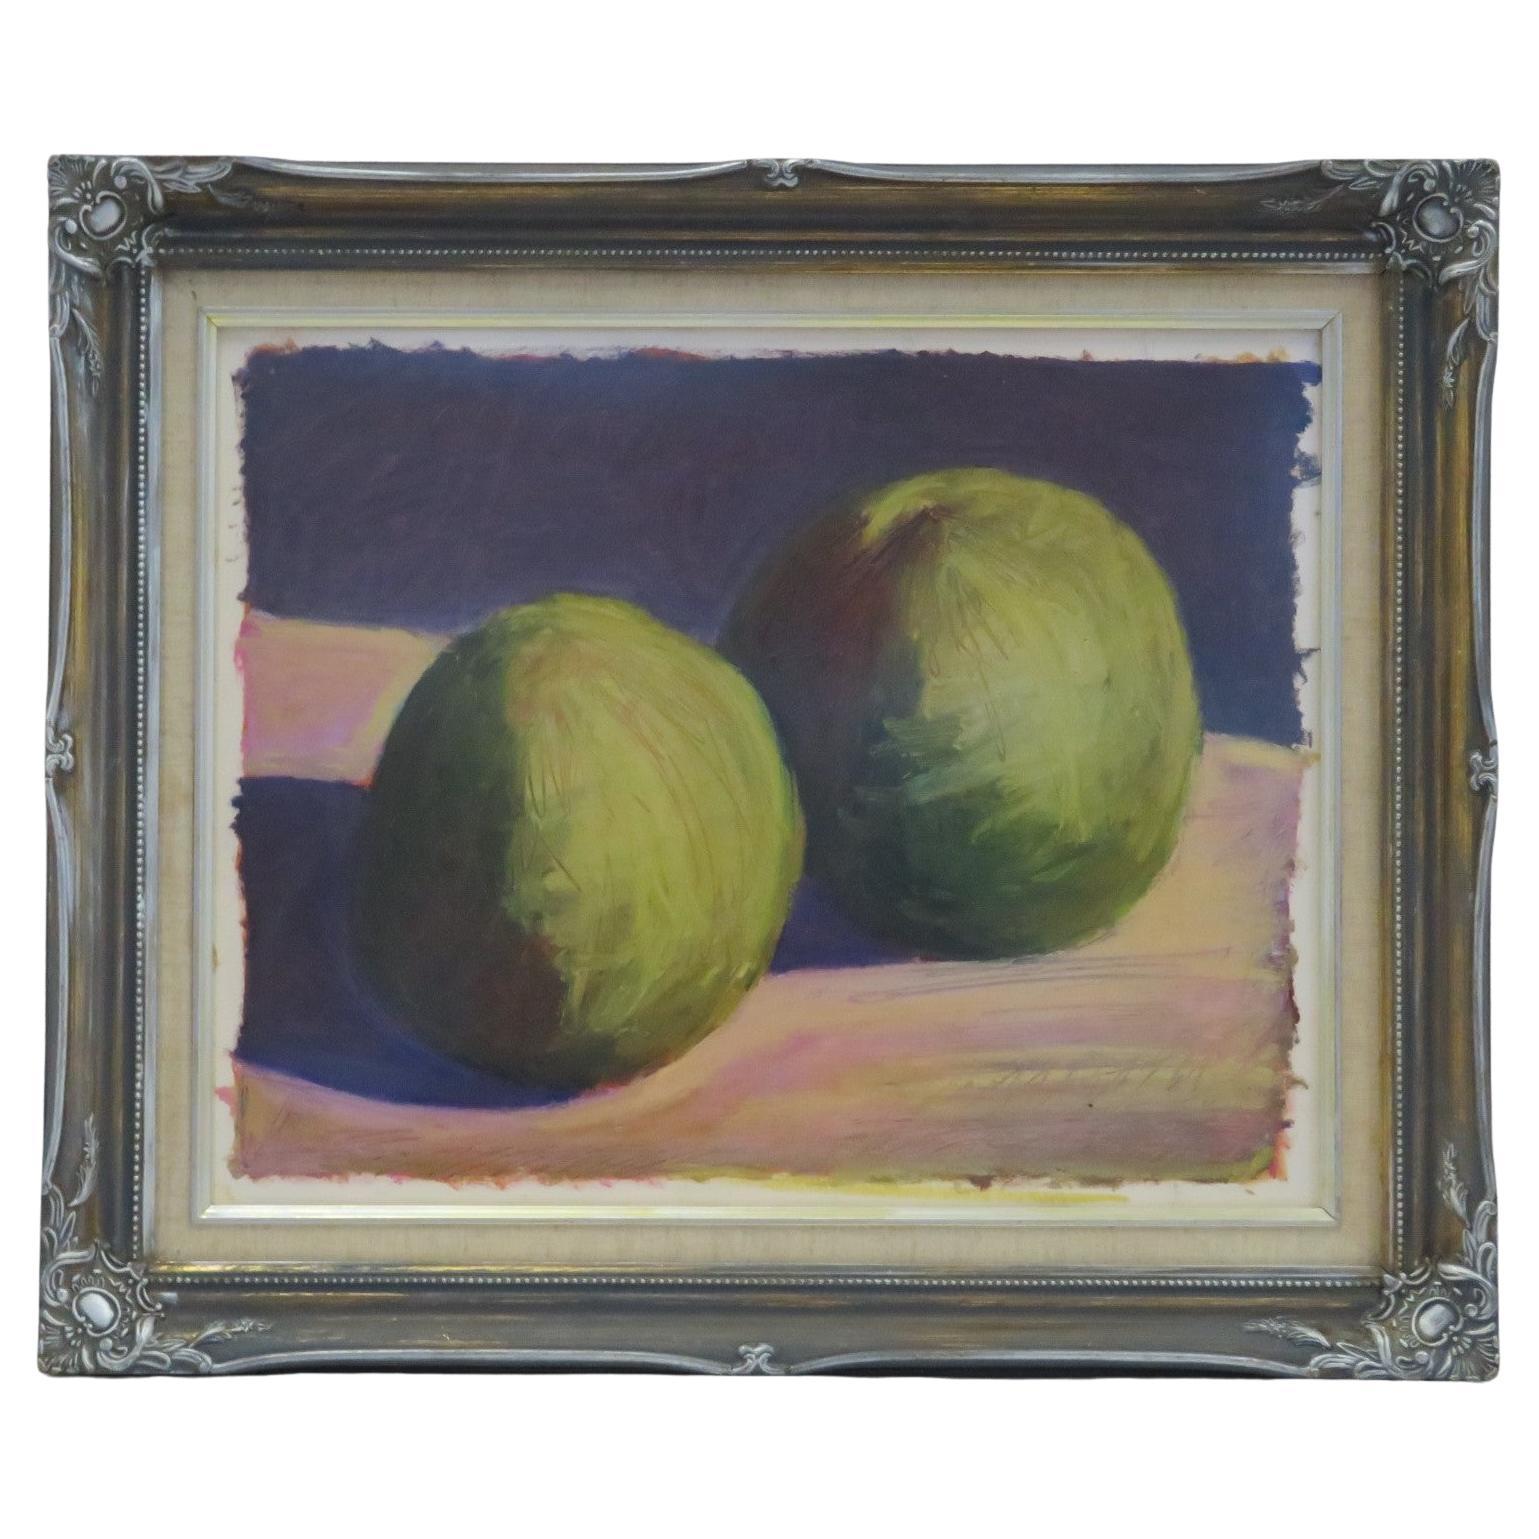 Impossible to read signature on this sweet Still Life with Melons. In a soft pleasing lavender pink color, sit two very round lime green melons (?) with a dark blue backdrop. An illegible signature and date '69 are scratched on the lower right